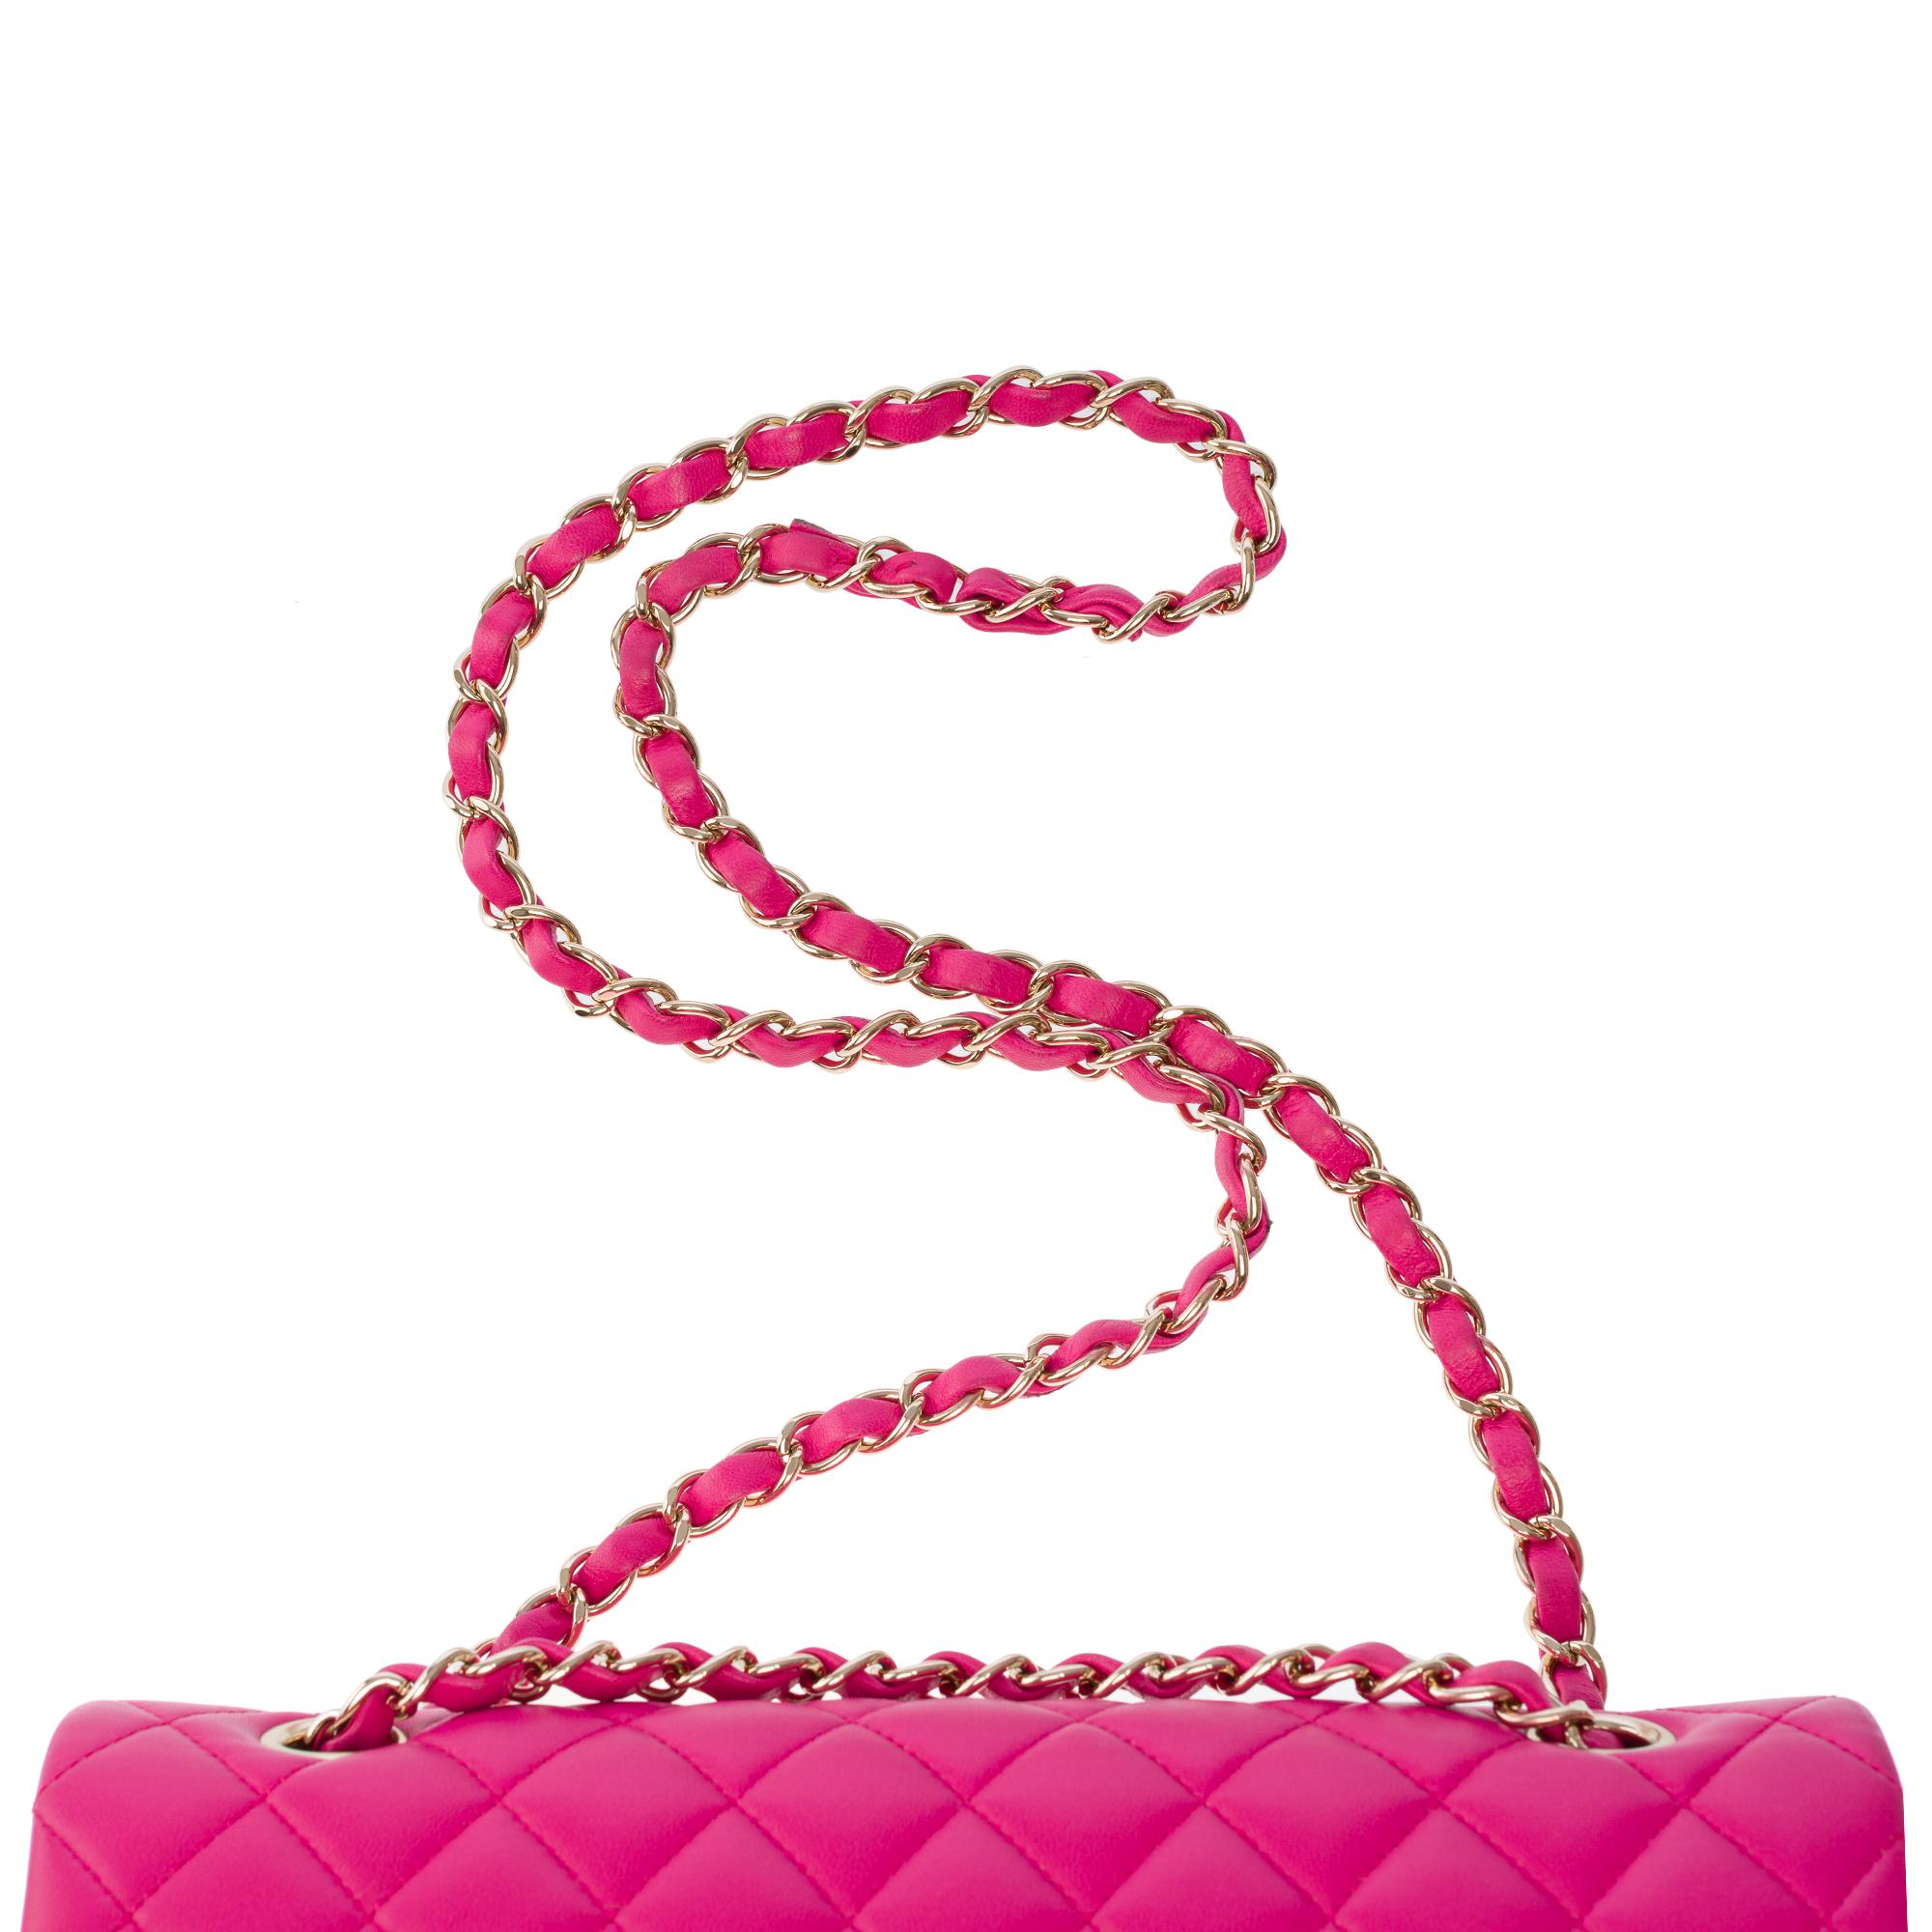 Chanel Timeless double flap shoulder bag in Pink quilted lambskin leather, CHW 6